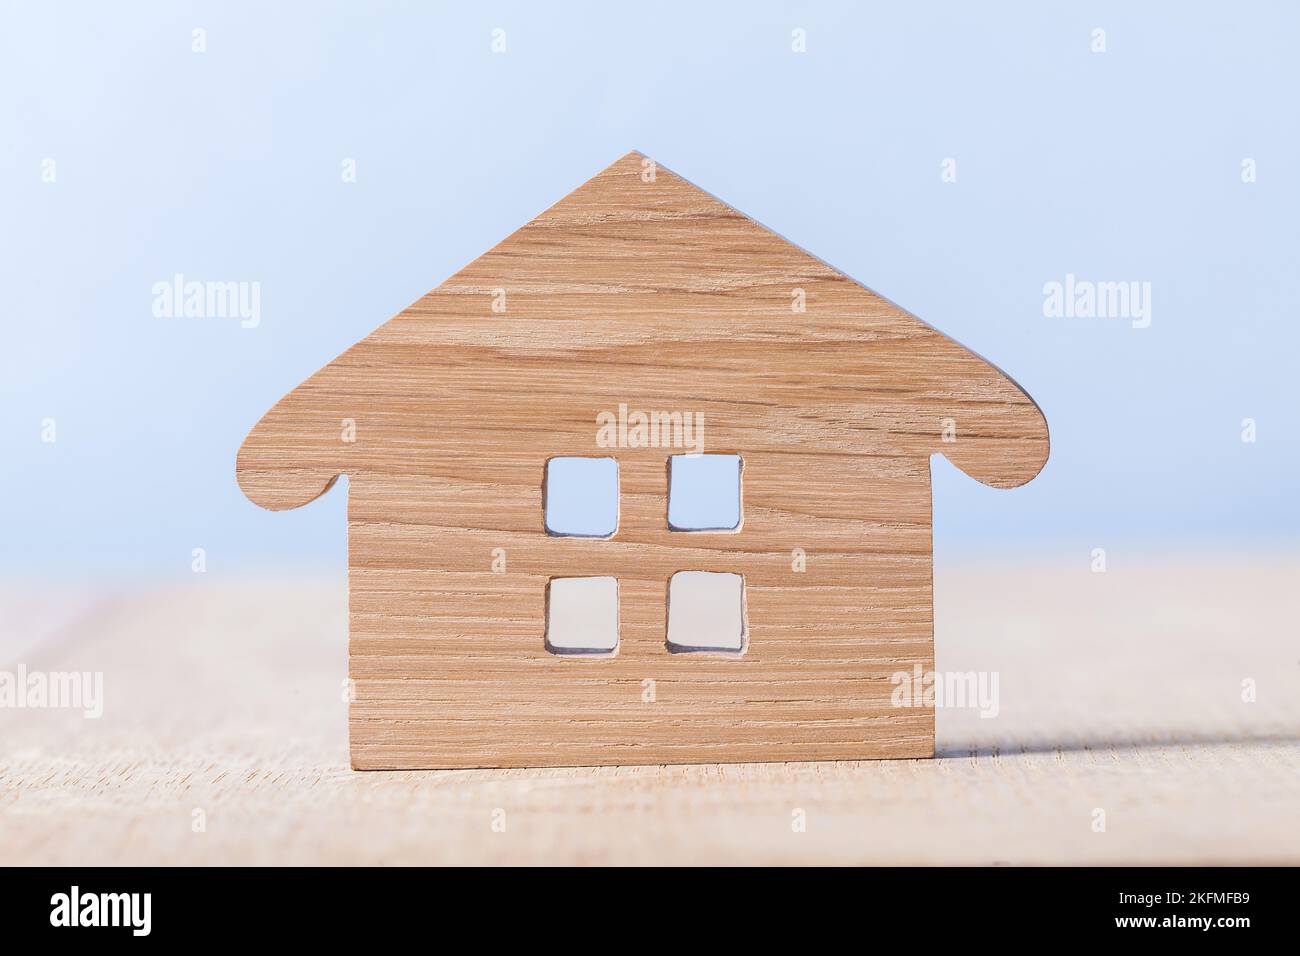 symbol of wooden house on blue and wooden background Stock Photo